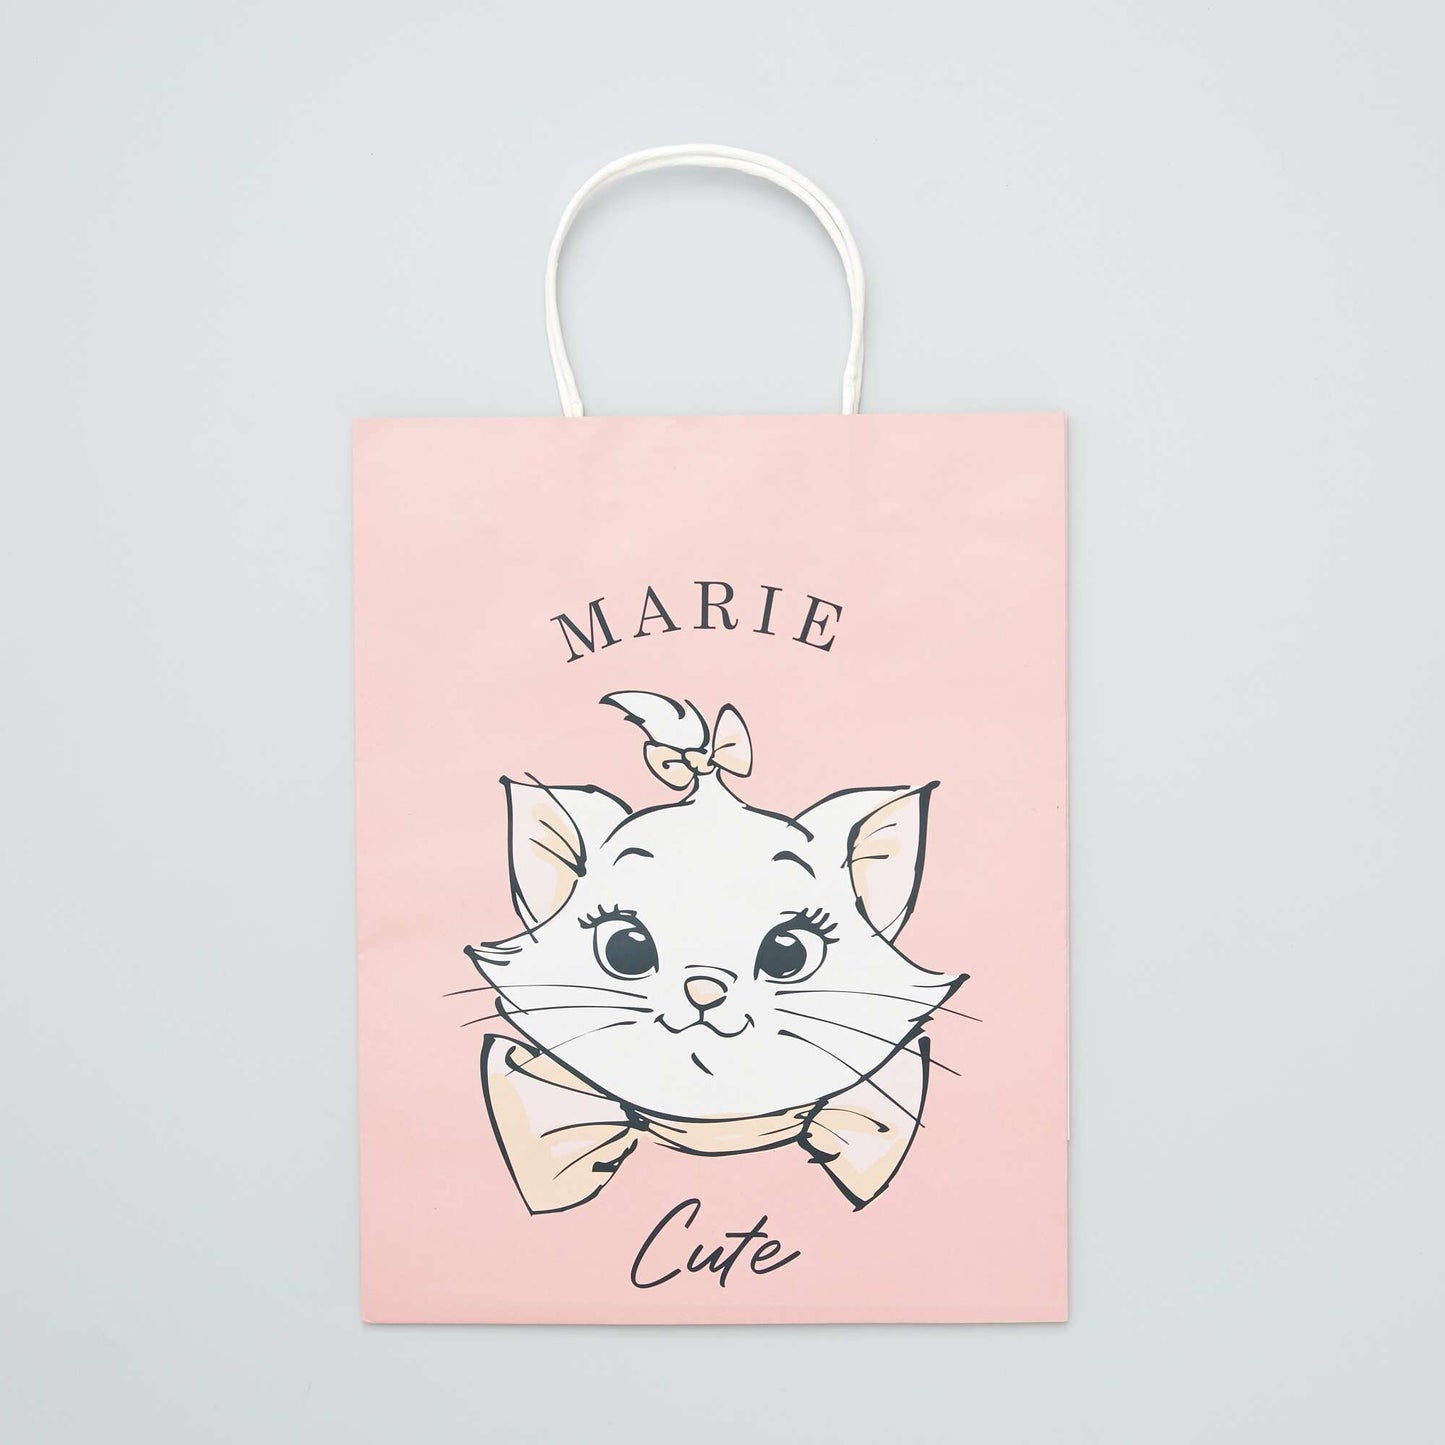 'The Aristocats' 'Marie' gift bag PINK